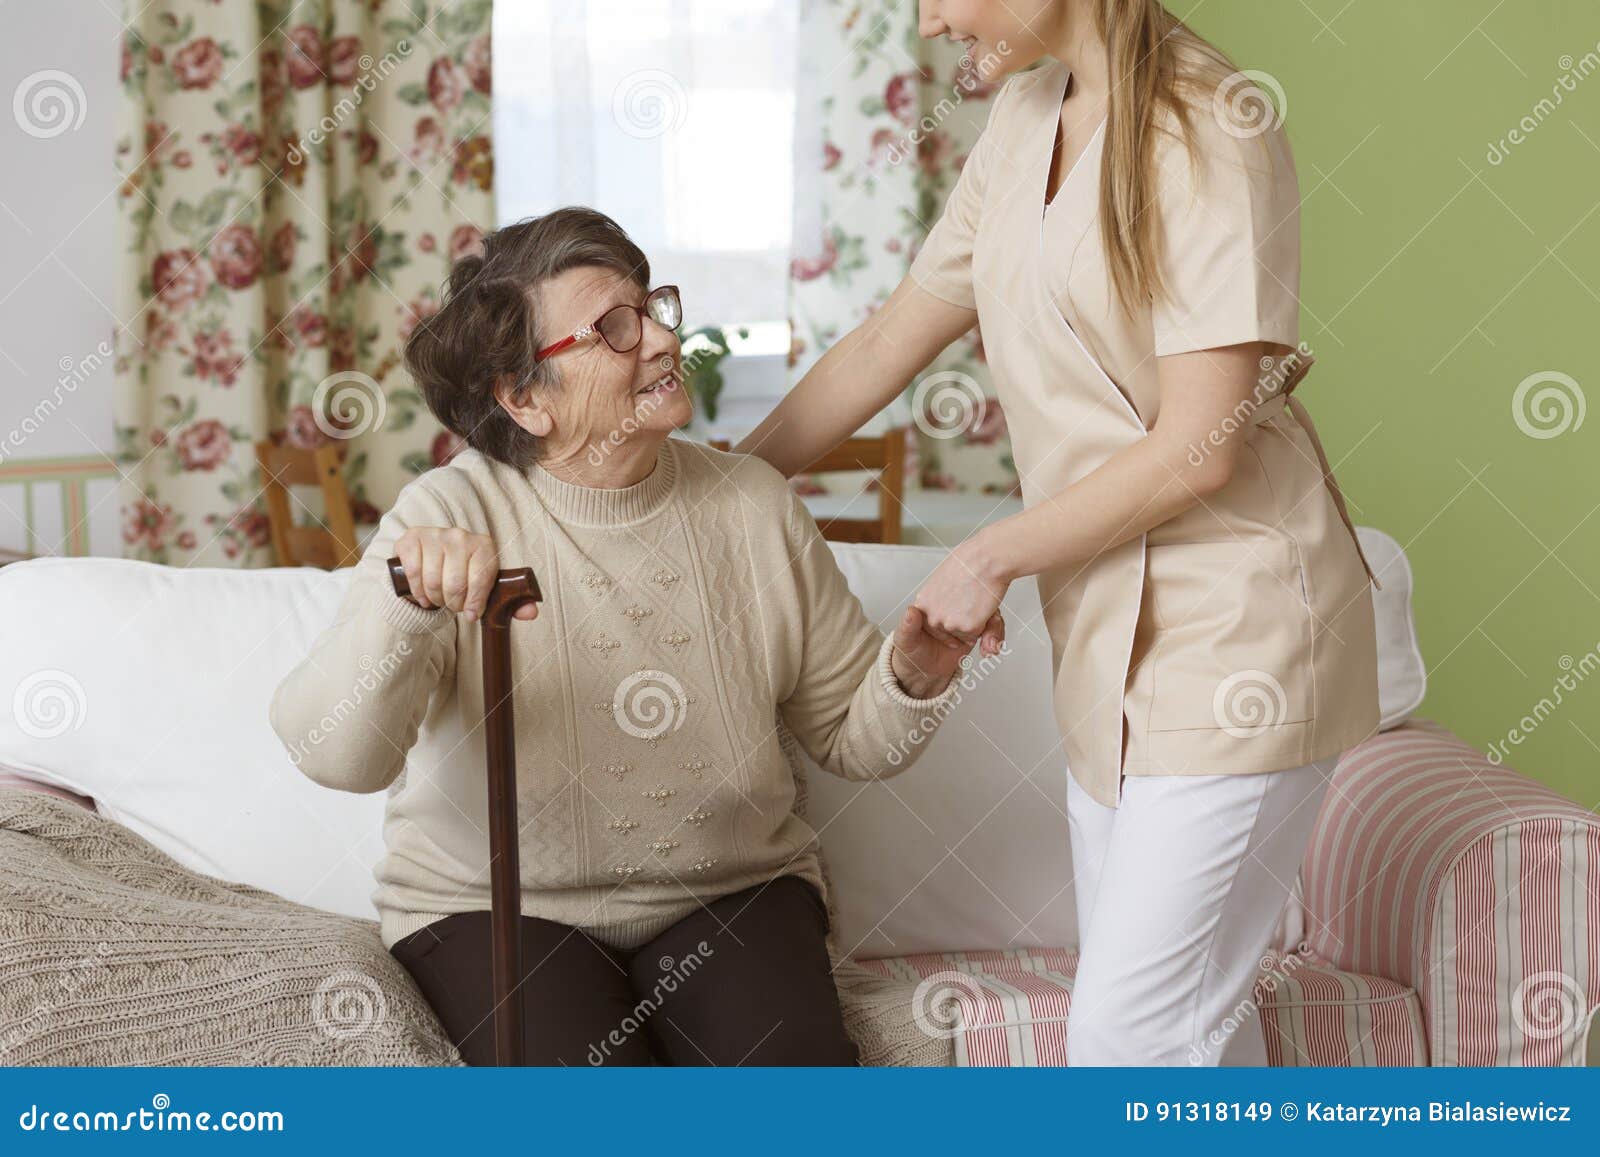 Caregiver Helping Senior Woman Stock Image Image Of Support Doctor 91318149